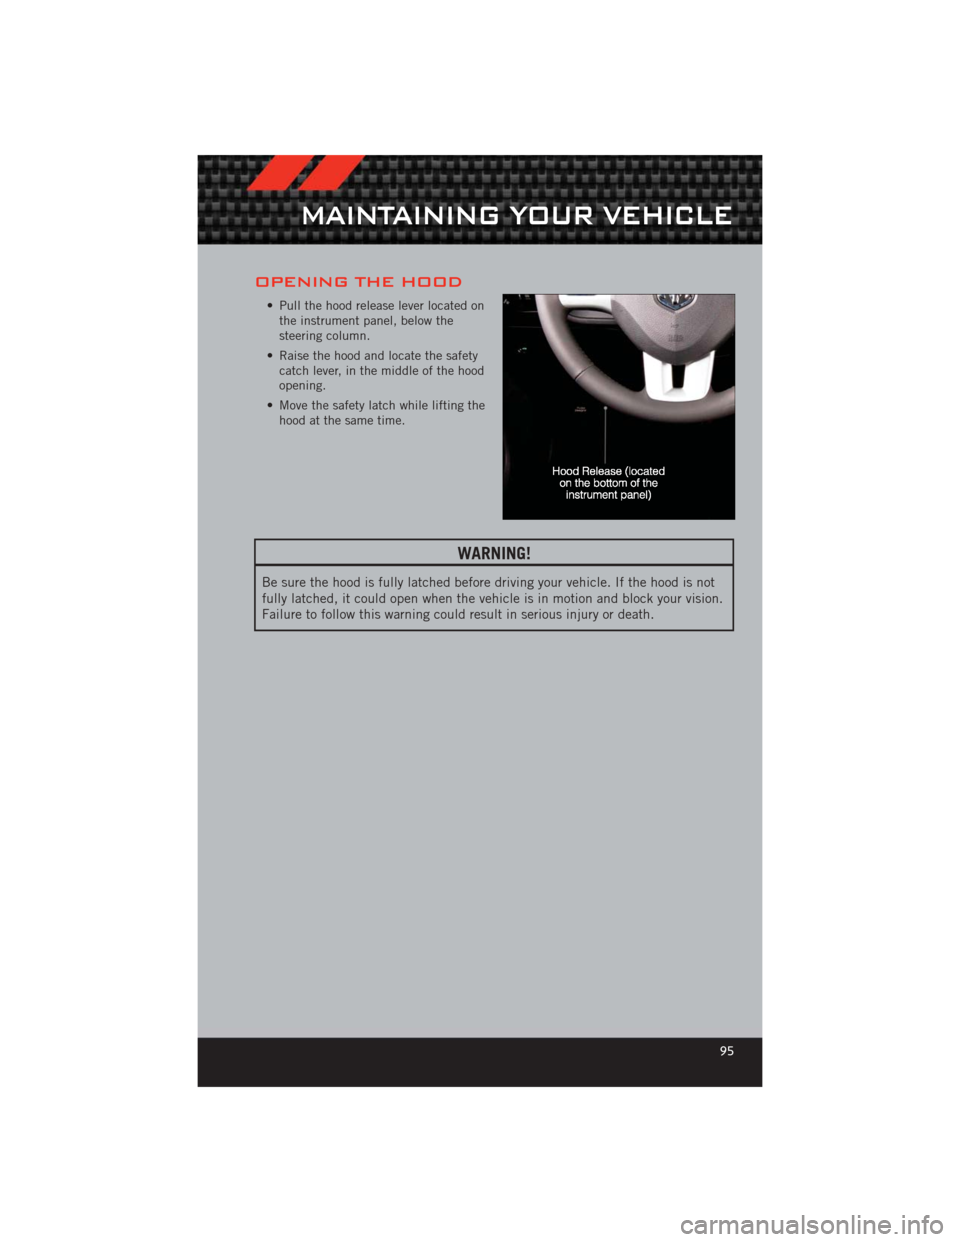 DODGE CHALLENGER 2012 3.G User Guide OPENING THE HOOD
• Pull the hood release lever located onthe instrument panel, below the
steering column.
• Raise the hood and locate the safety catch lever, in the middle of the hood
opening.
•